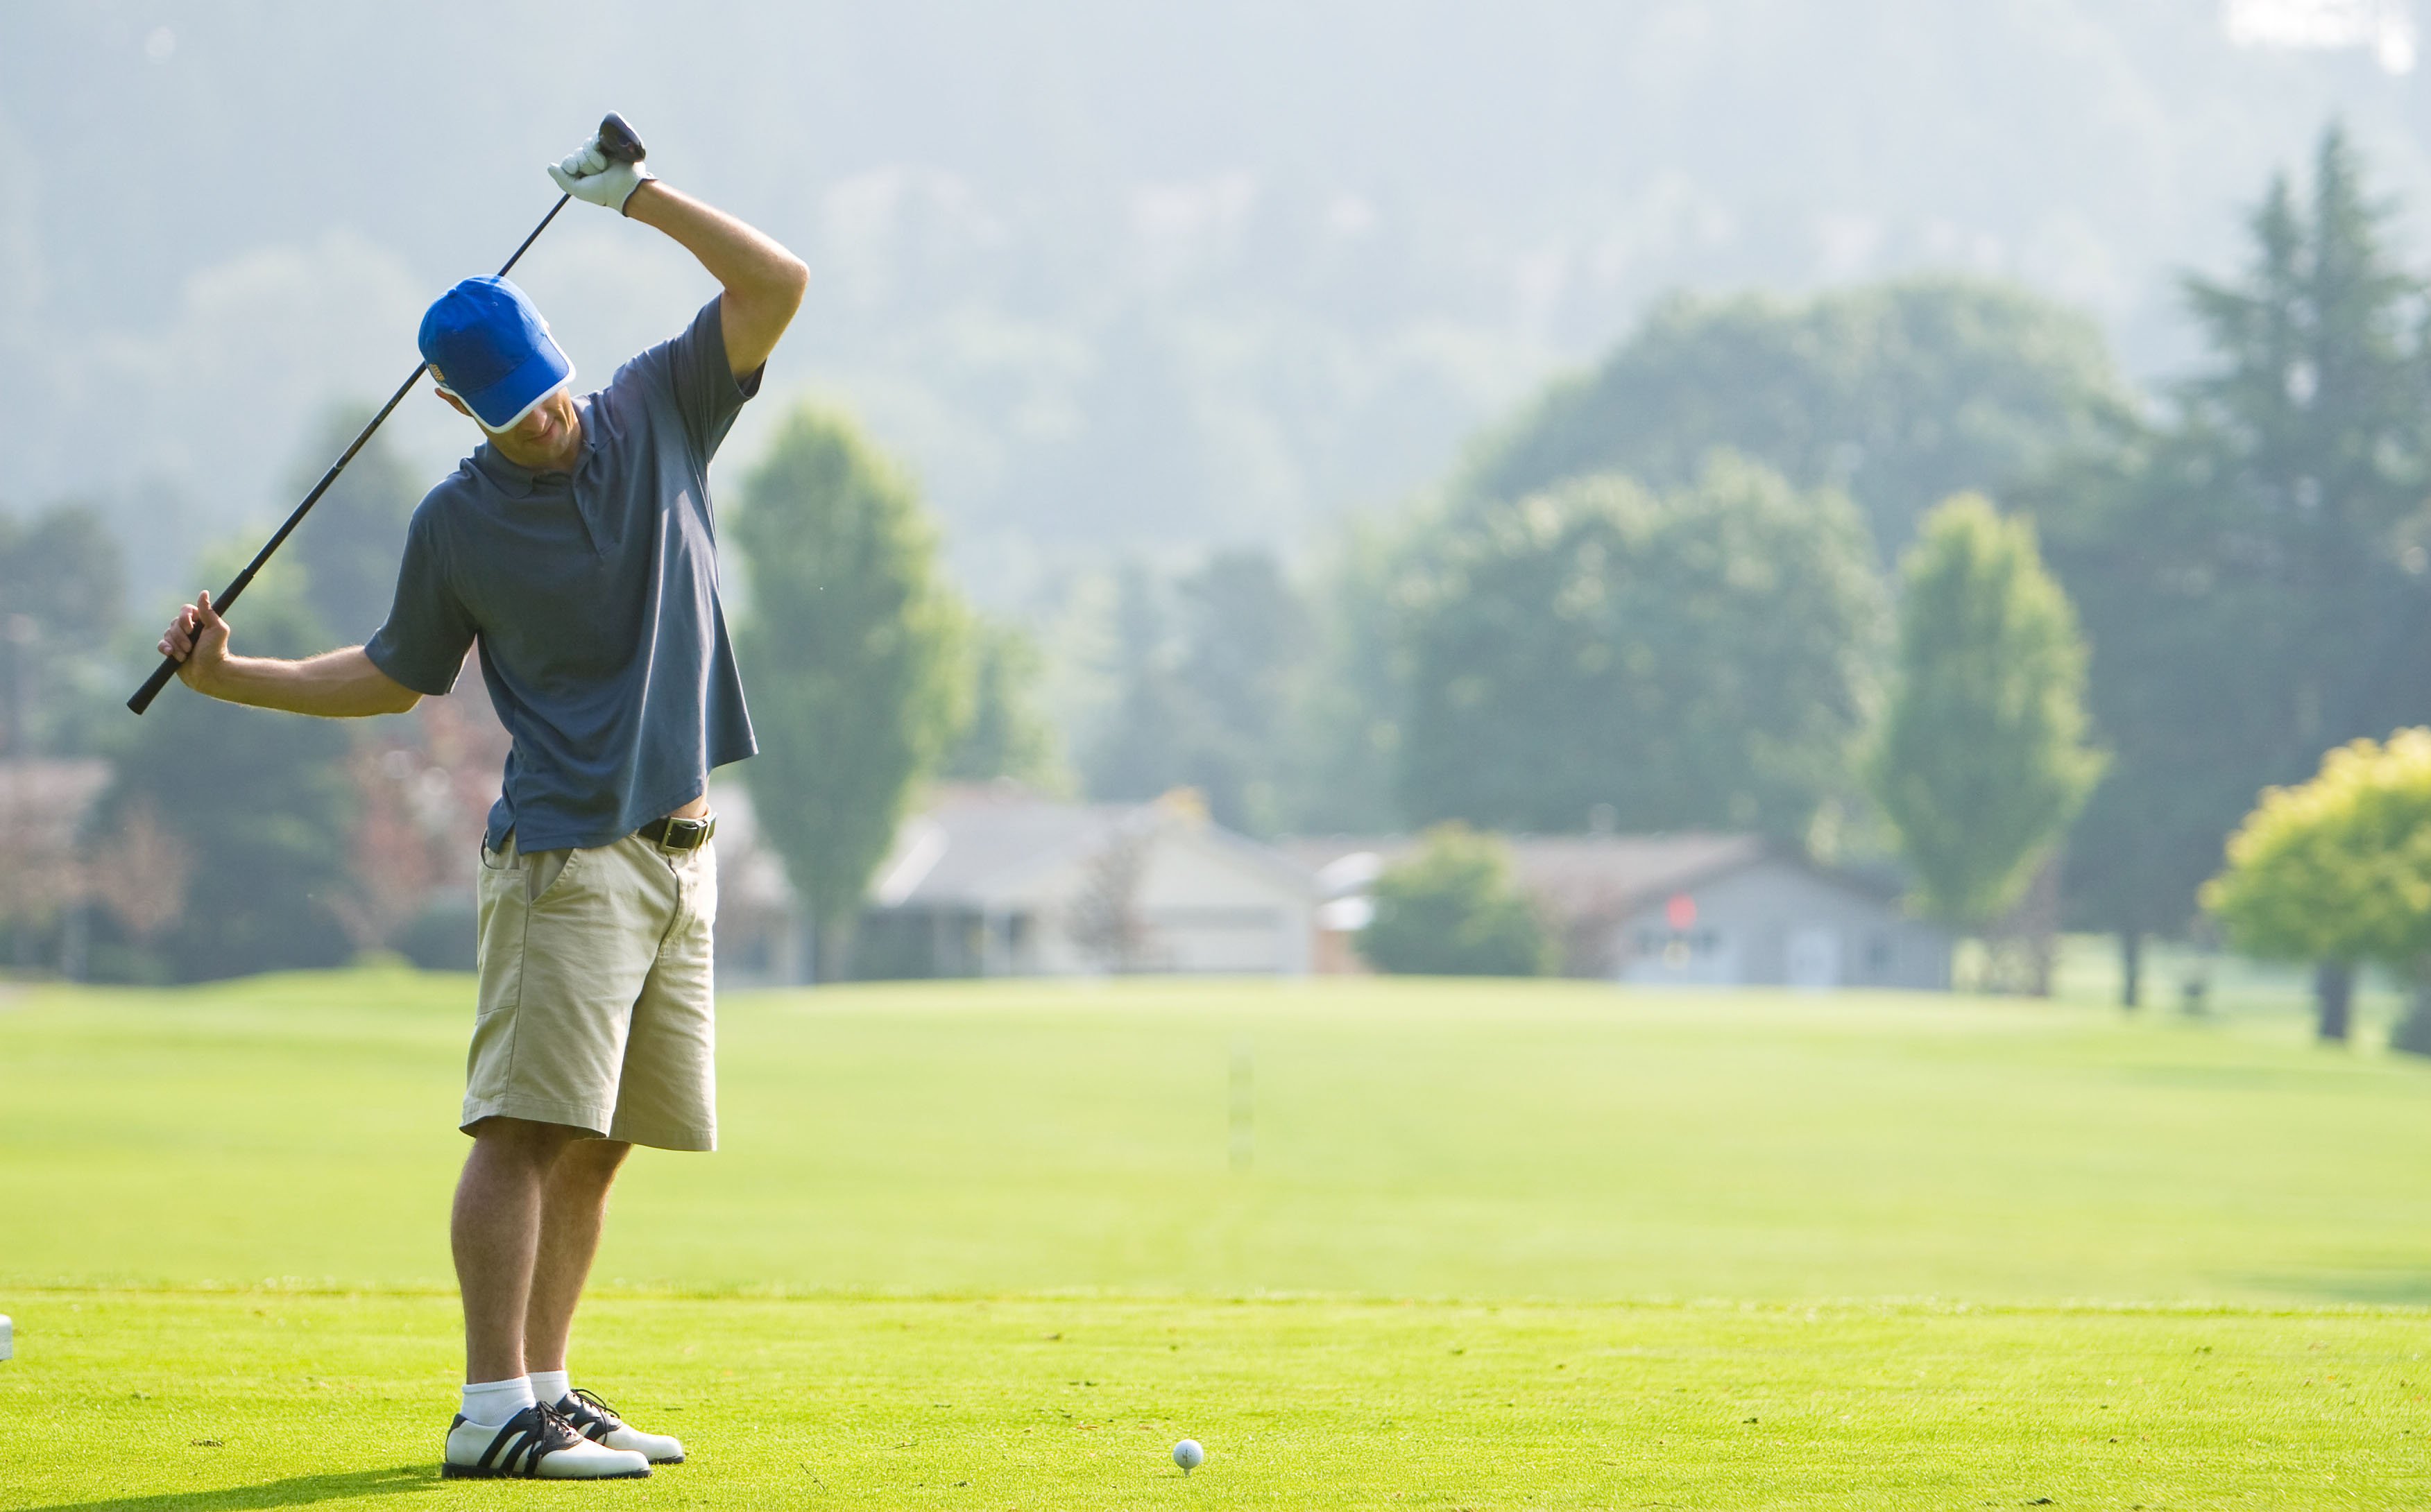 Exercising Before And After A Round Of Golf Can Reduce Wear And Tear On ...